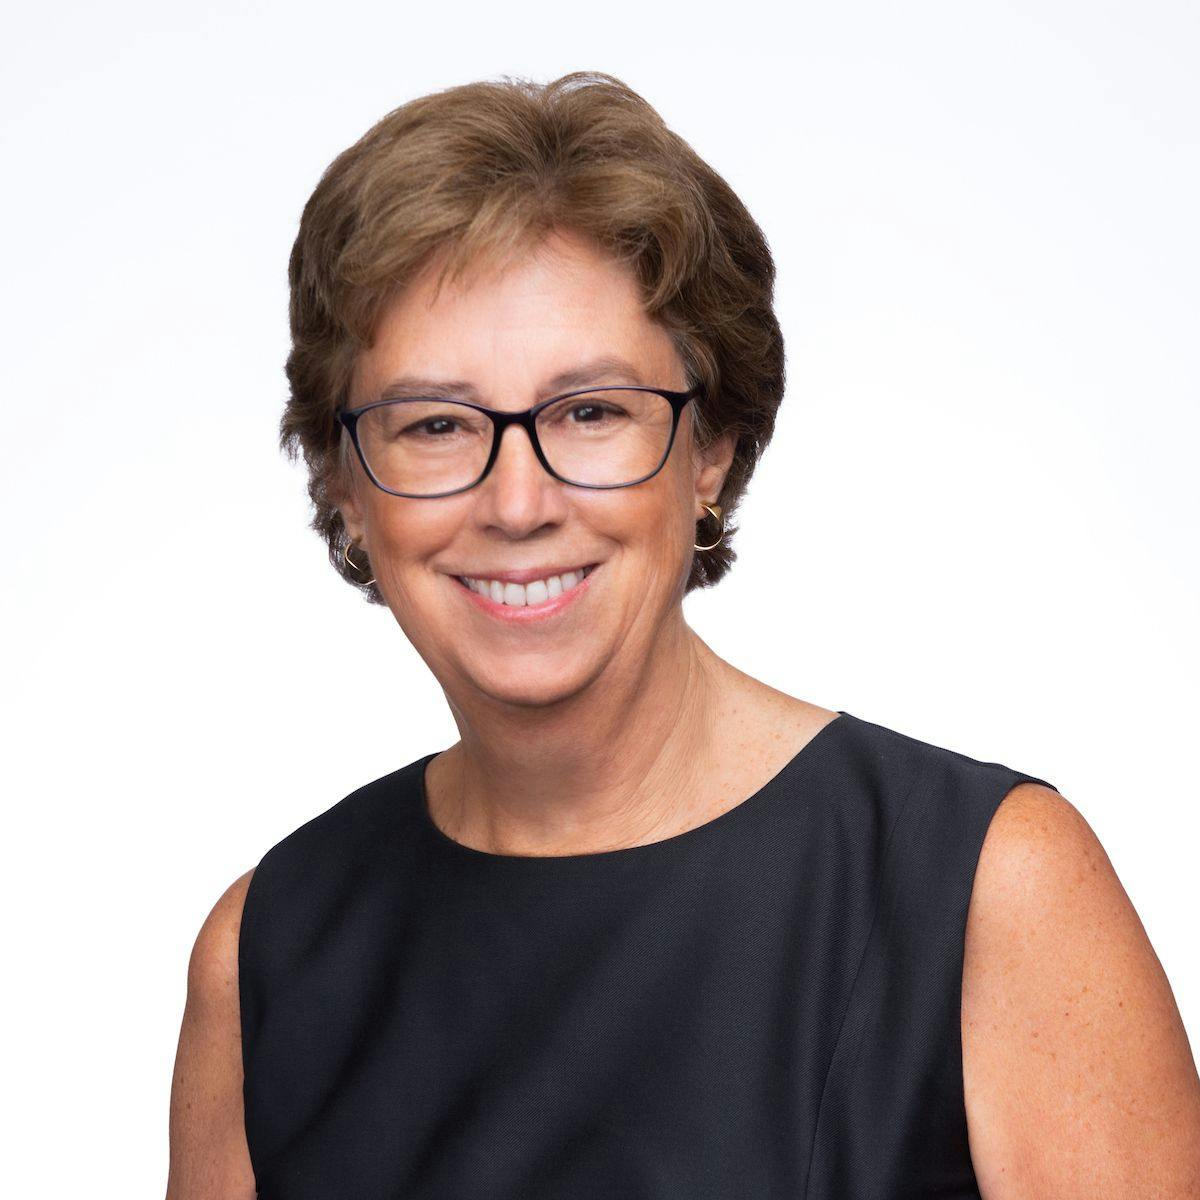 Nancy Thornberry, Founding CEO and Chair, Research and Development, Kallyope